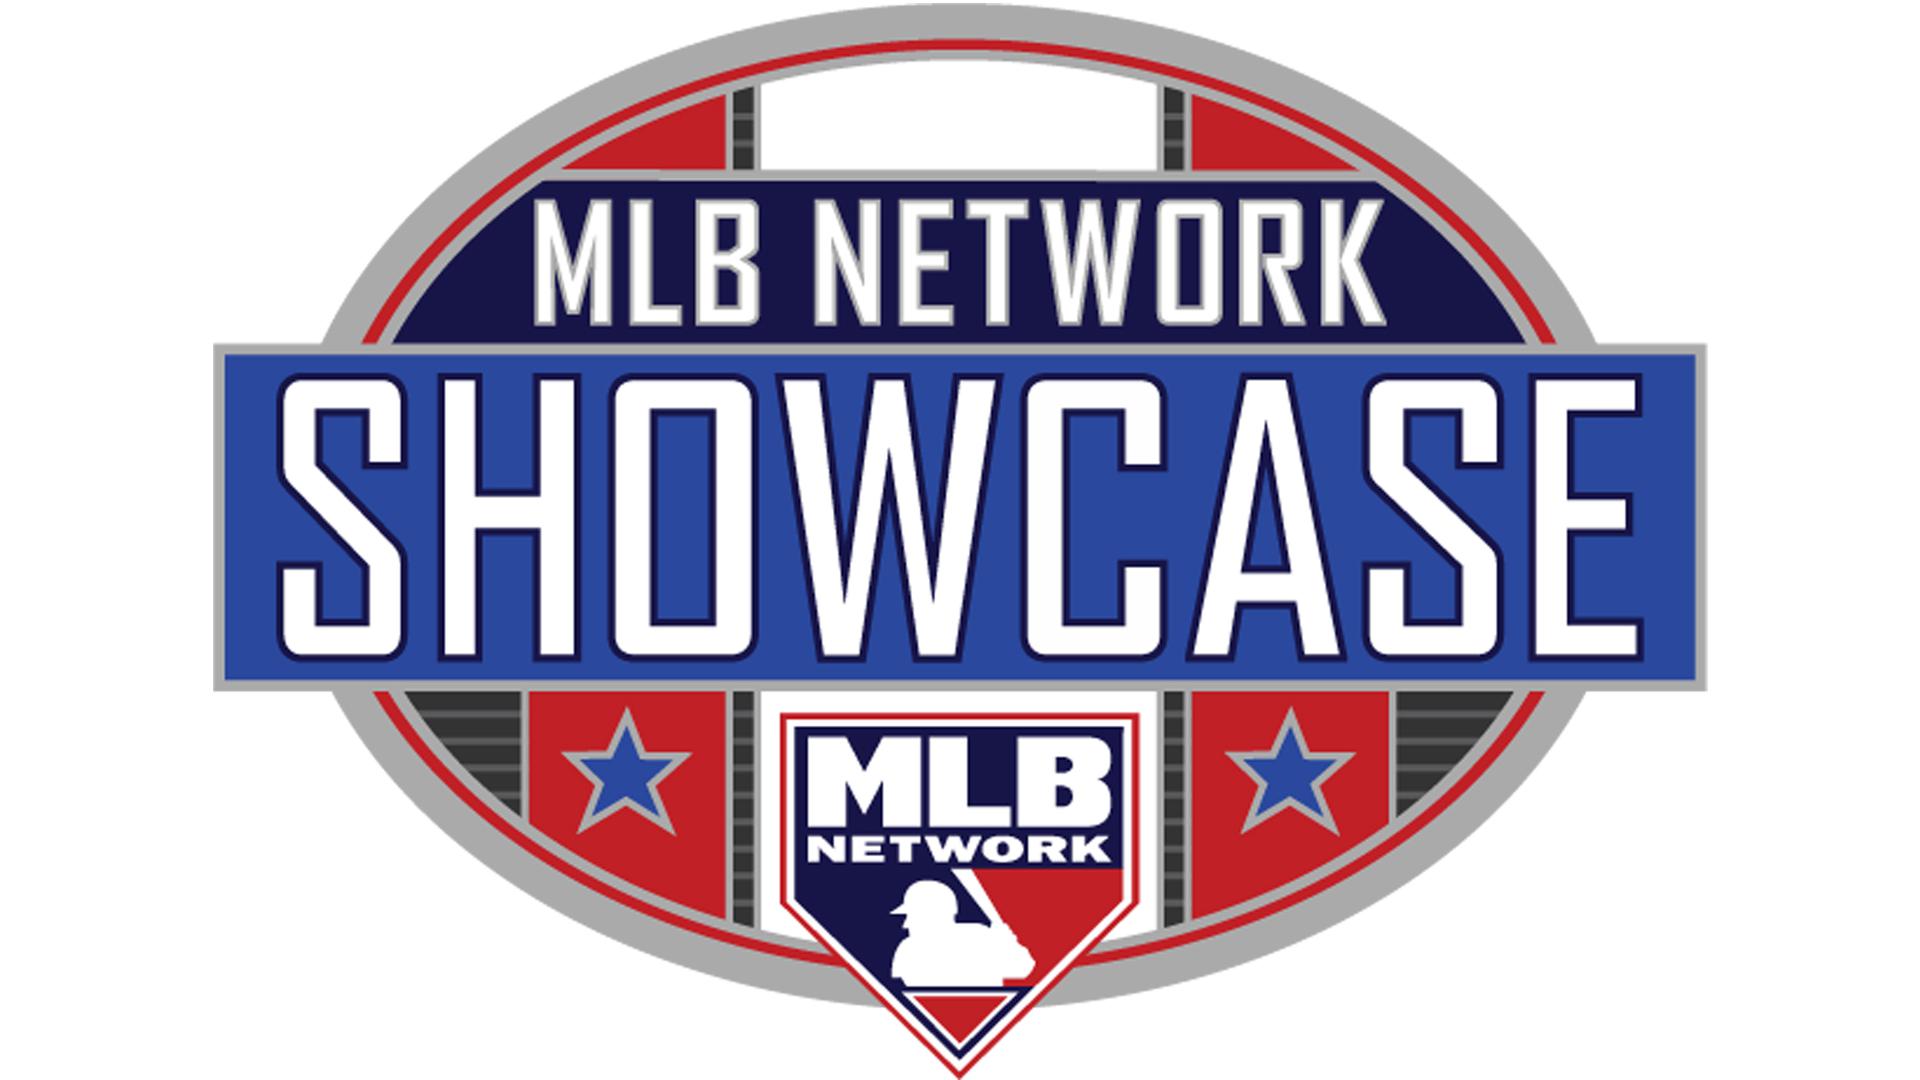 MLB Network Showcase logo in red, white and blue